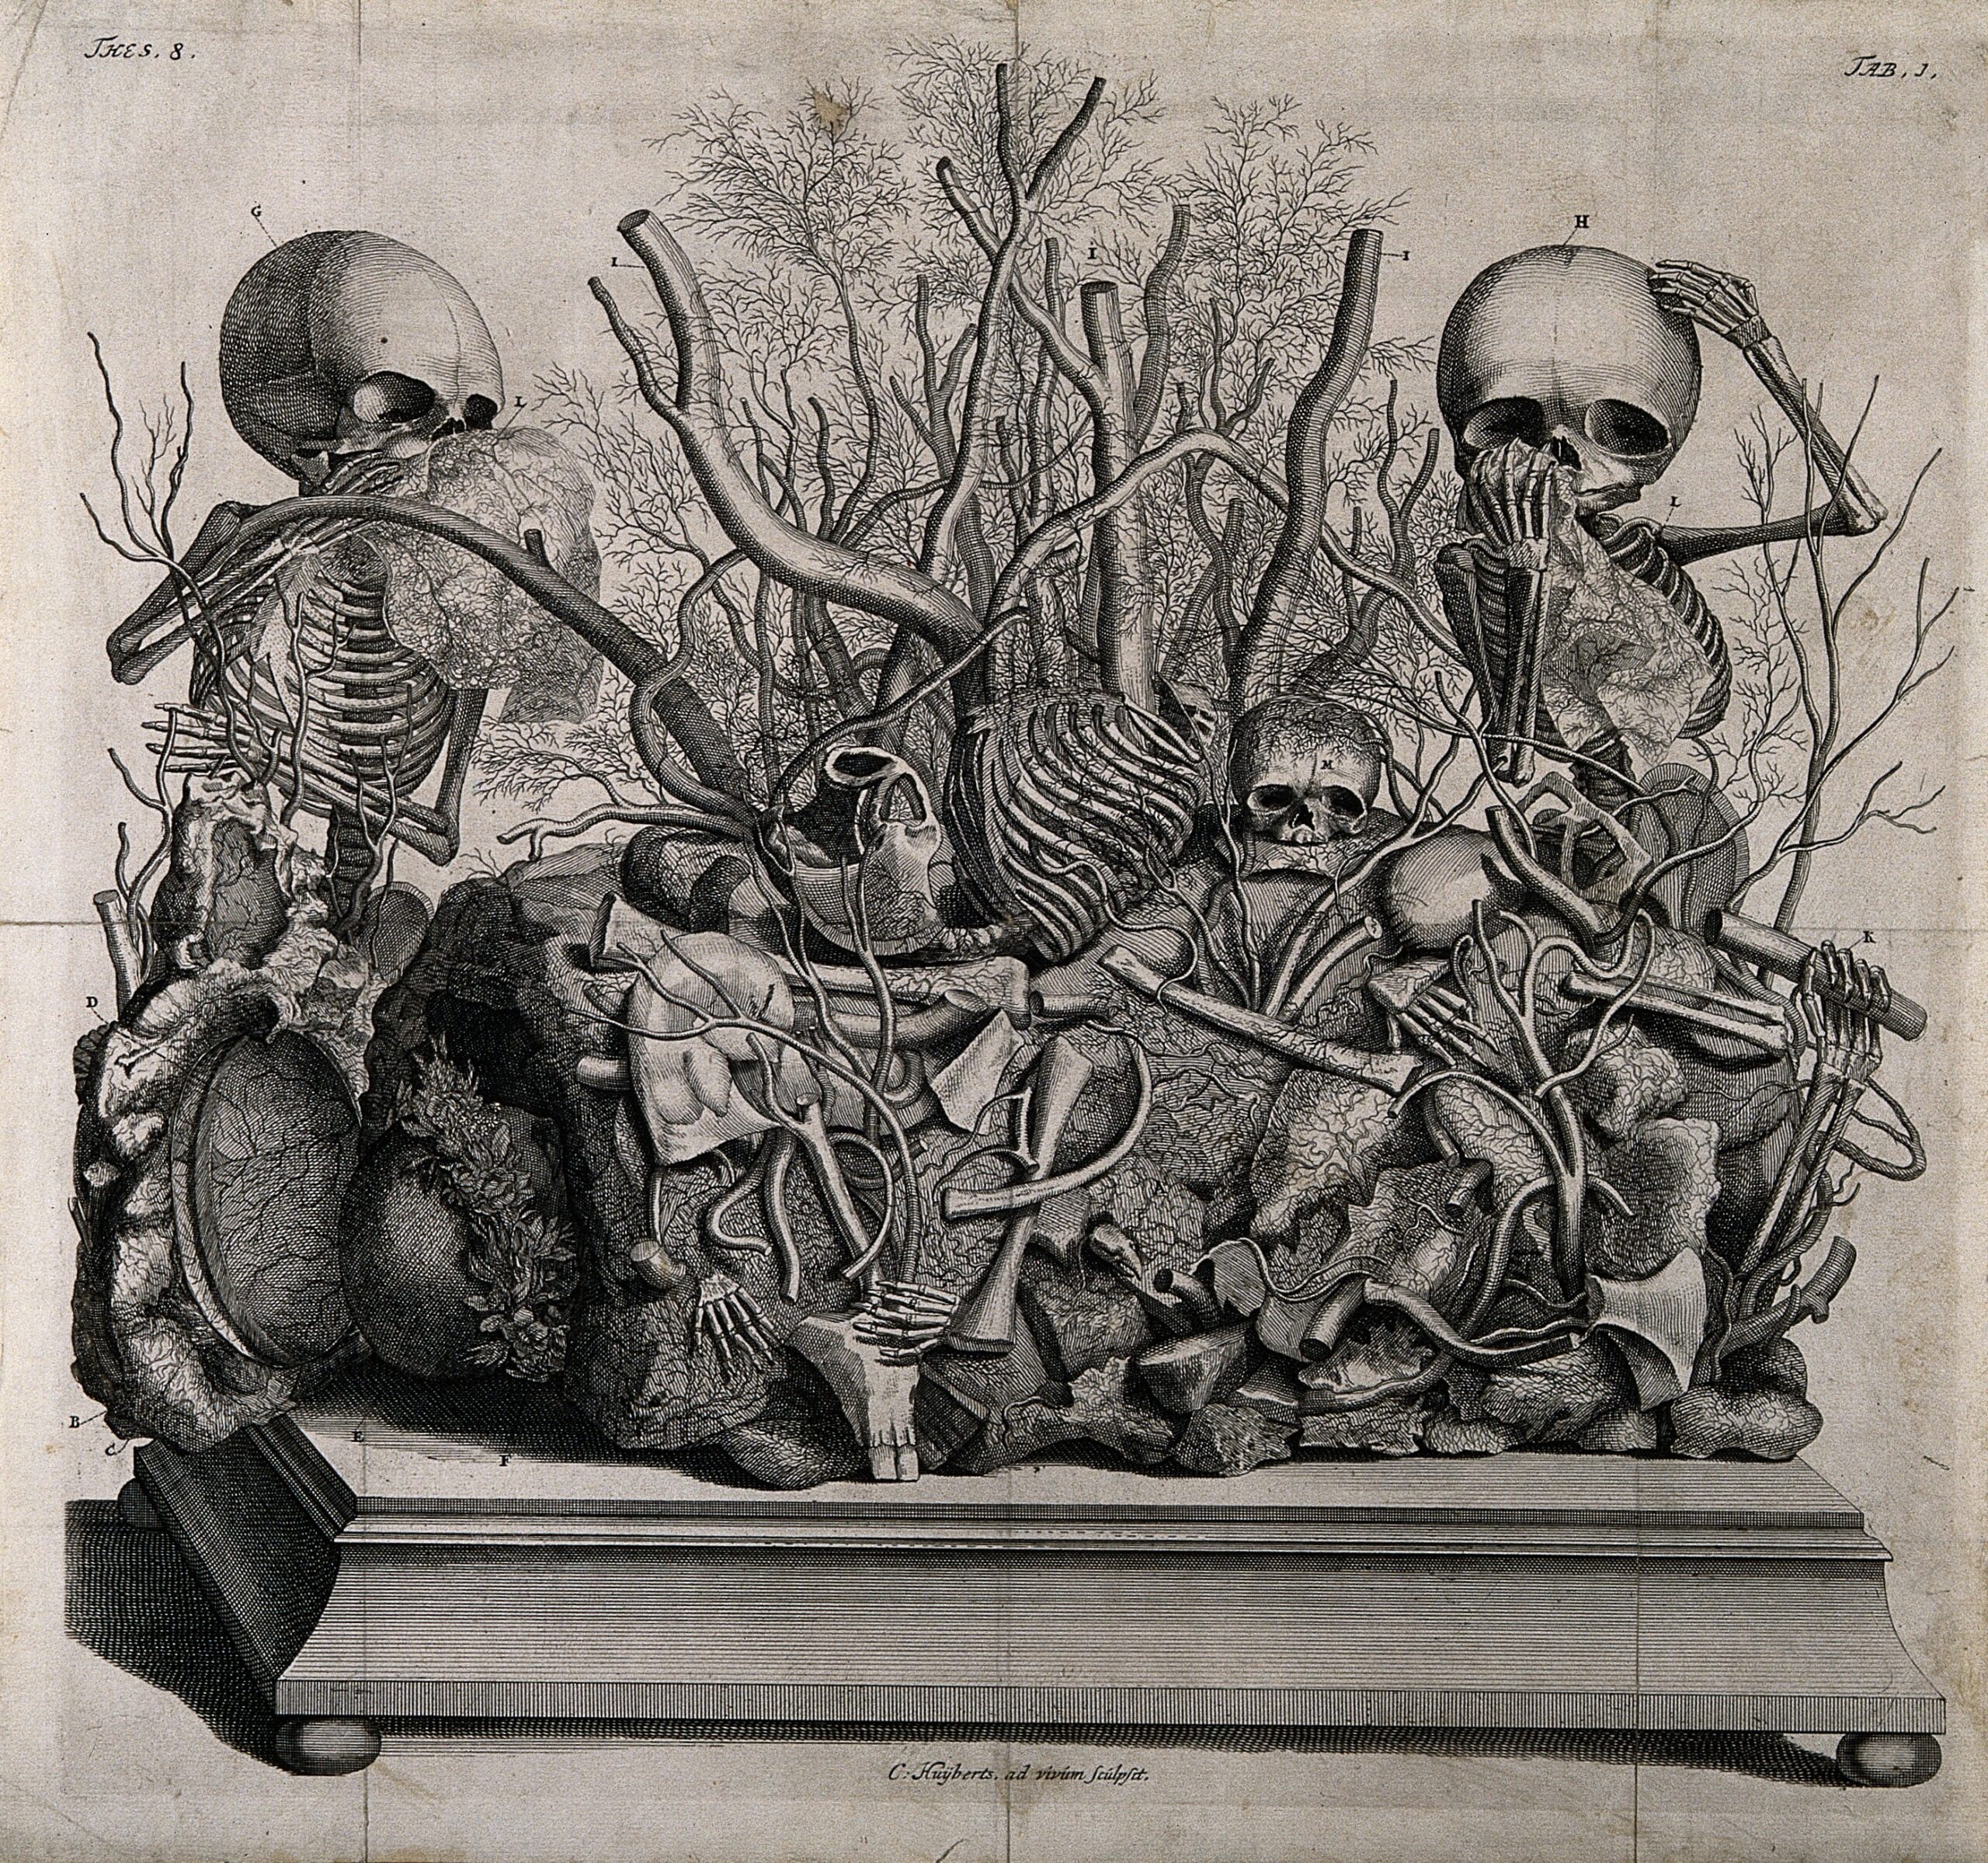 Skeletons in Classroom Diorama